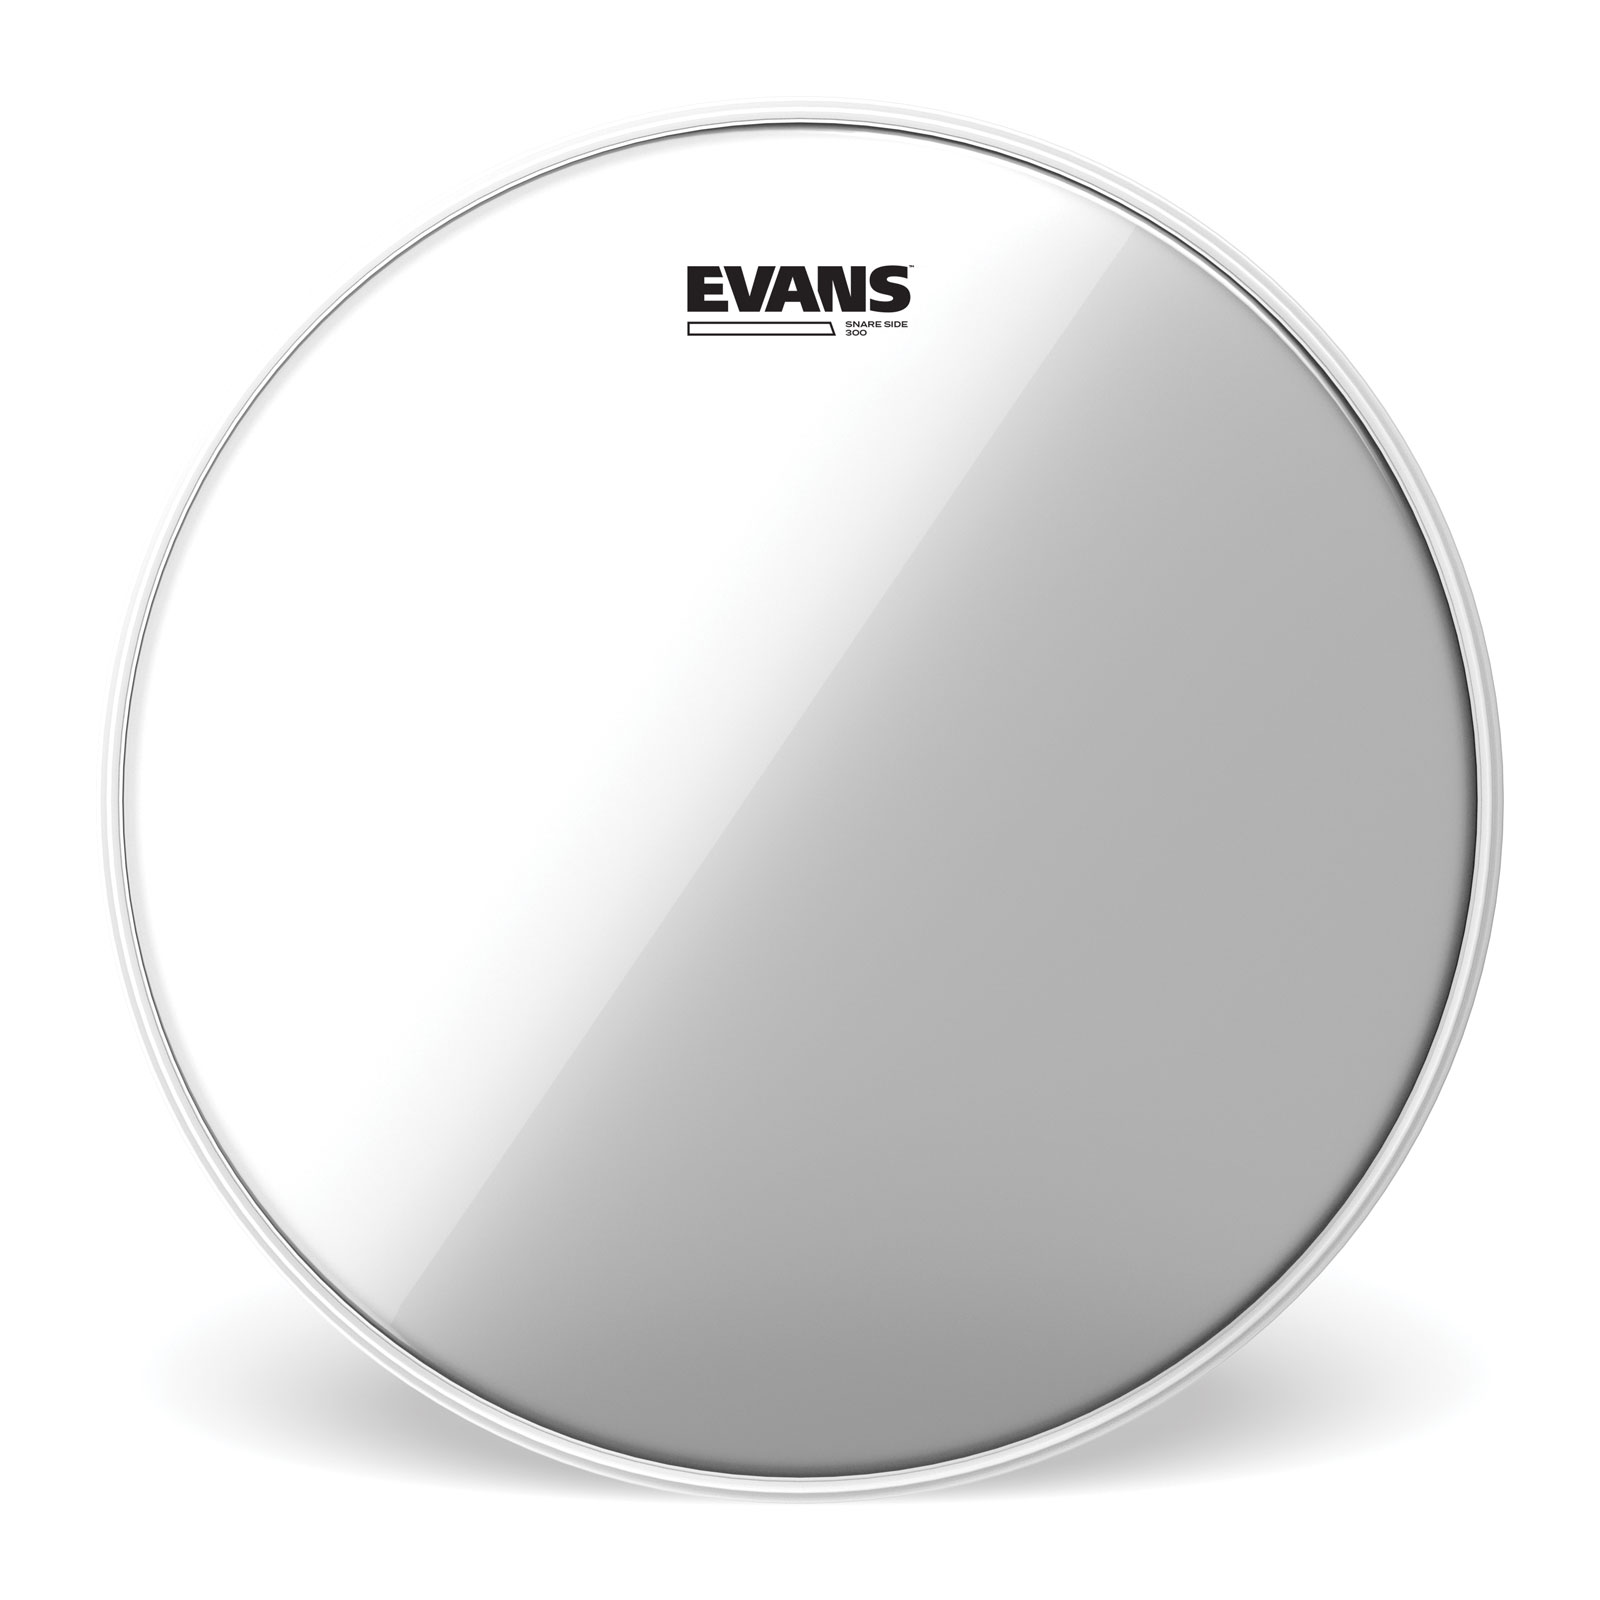 EVANS S13H30 - 300 CLEAR 13